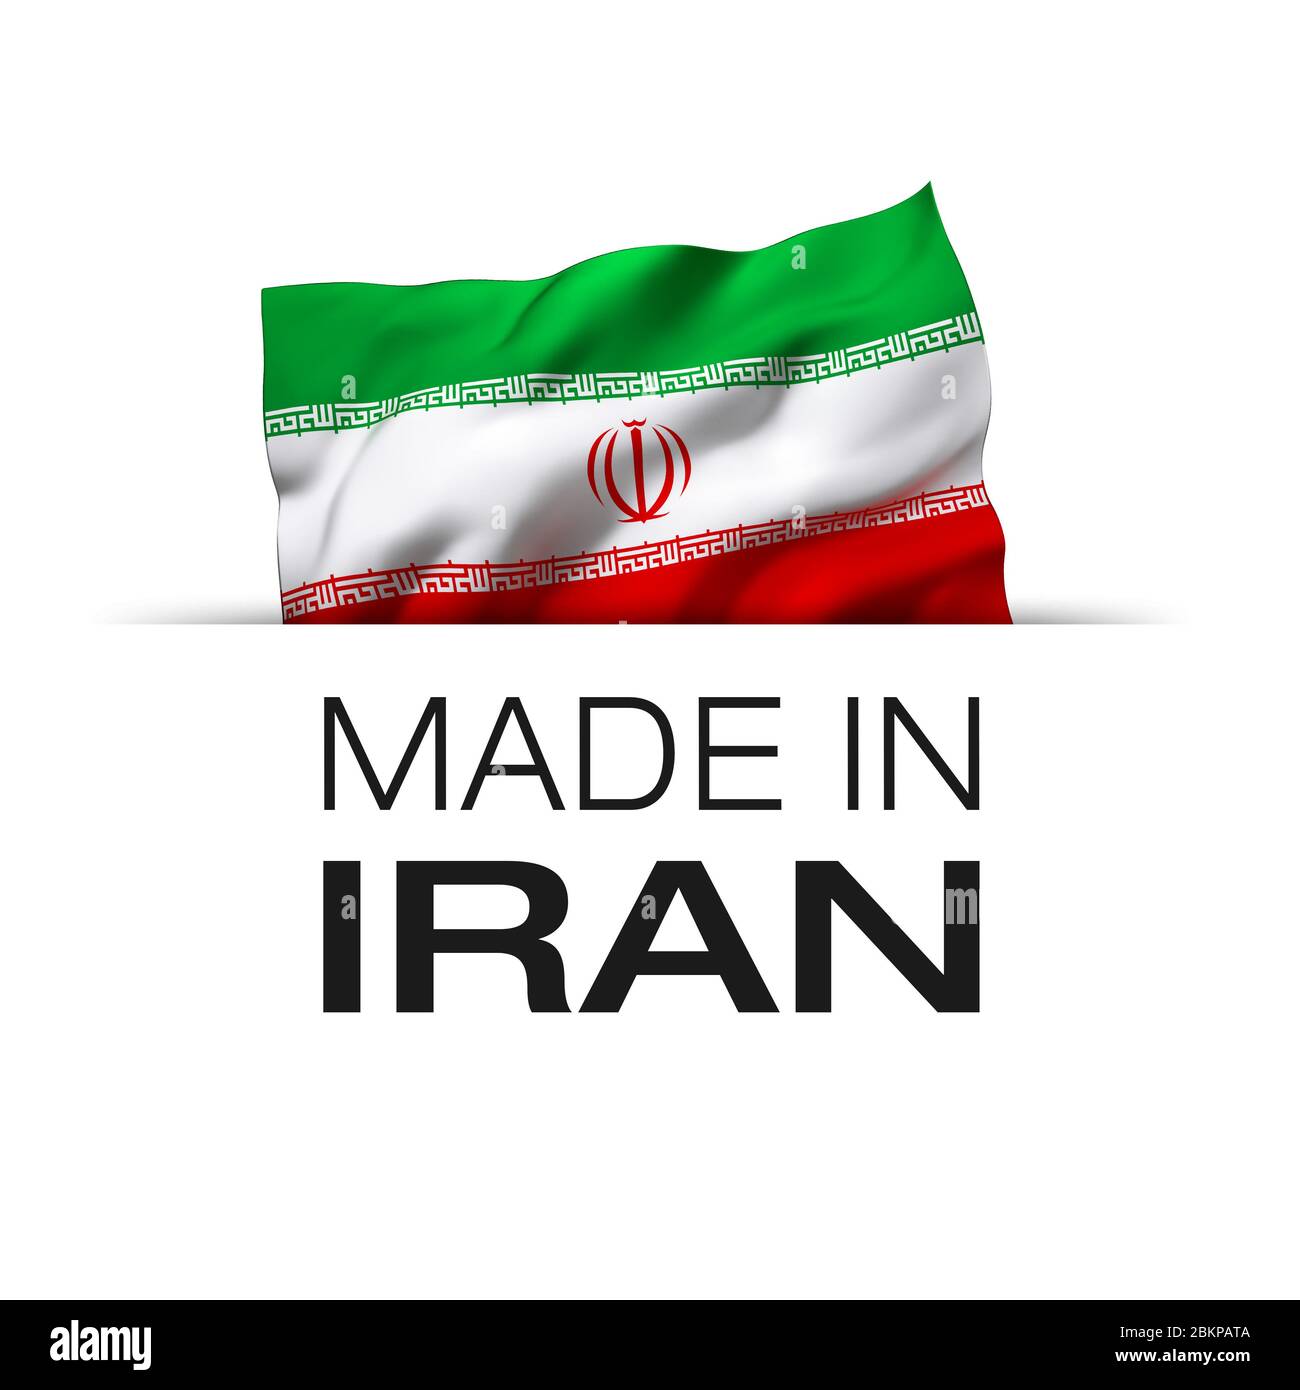 Made in Iran - Guarantee label with a waving Iranian flag. 3D illustration. Stock Photo